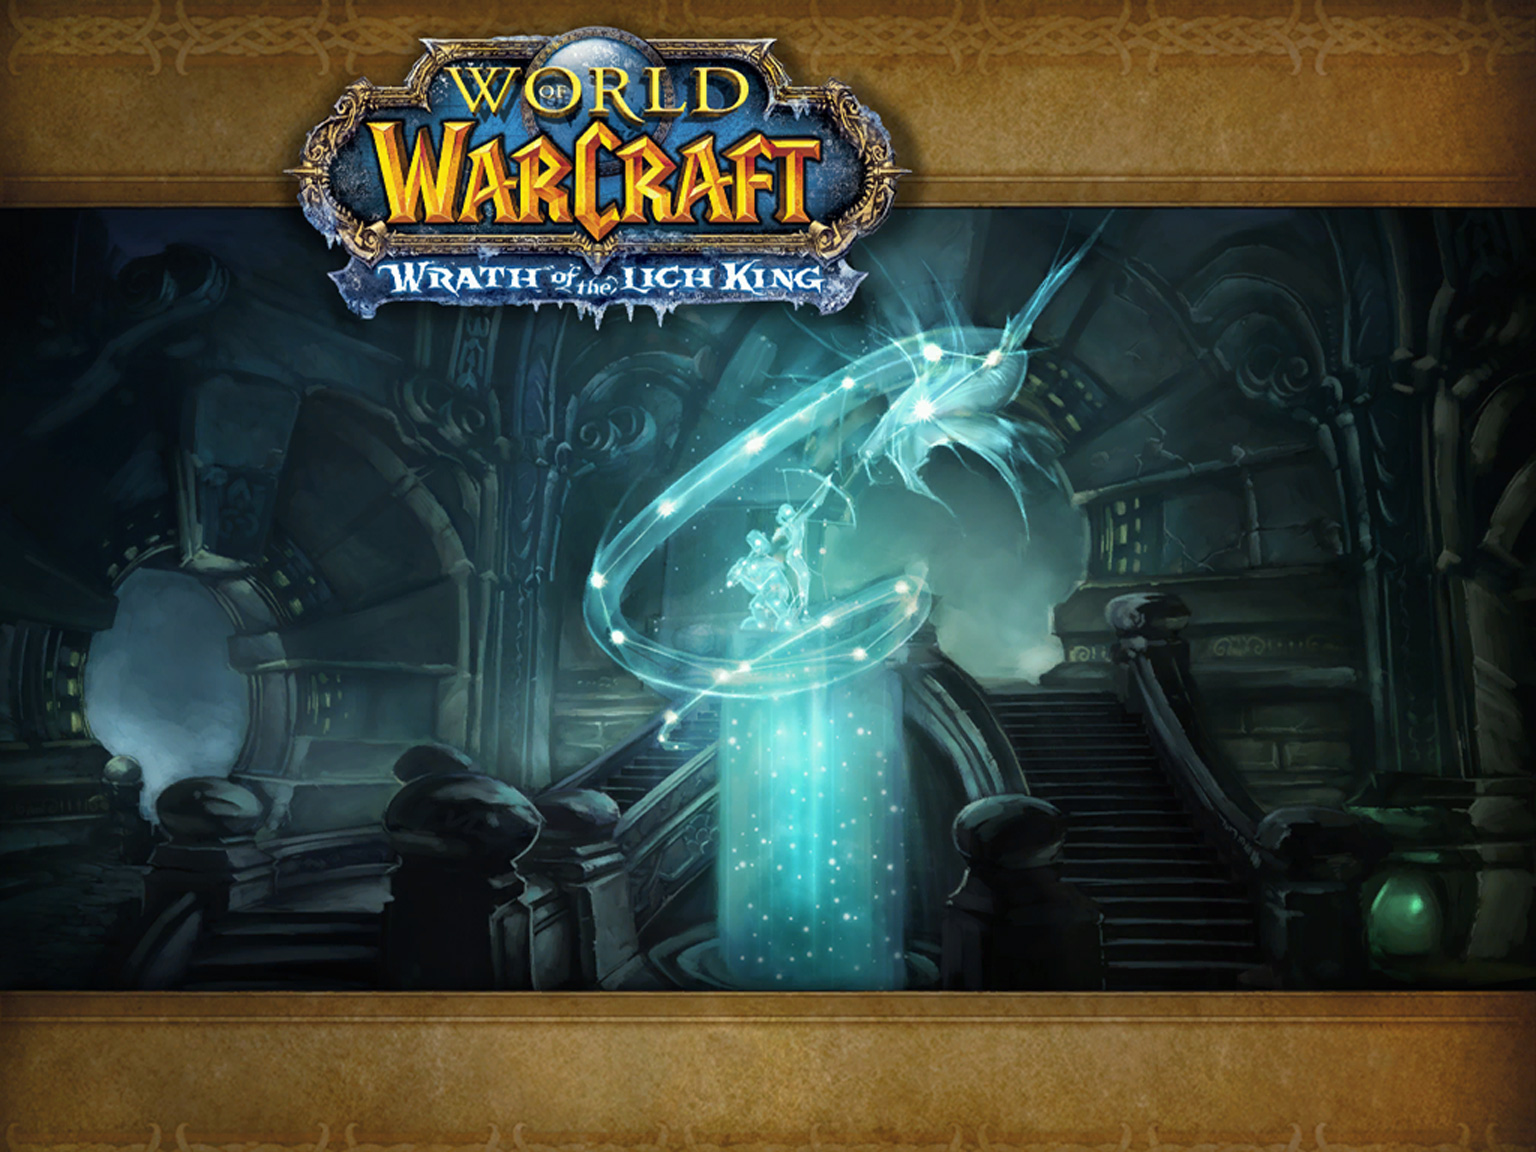 World of Warcraft subscriptions down by 1.3 million in three months